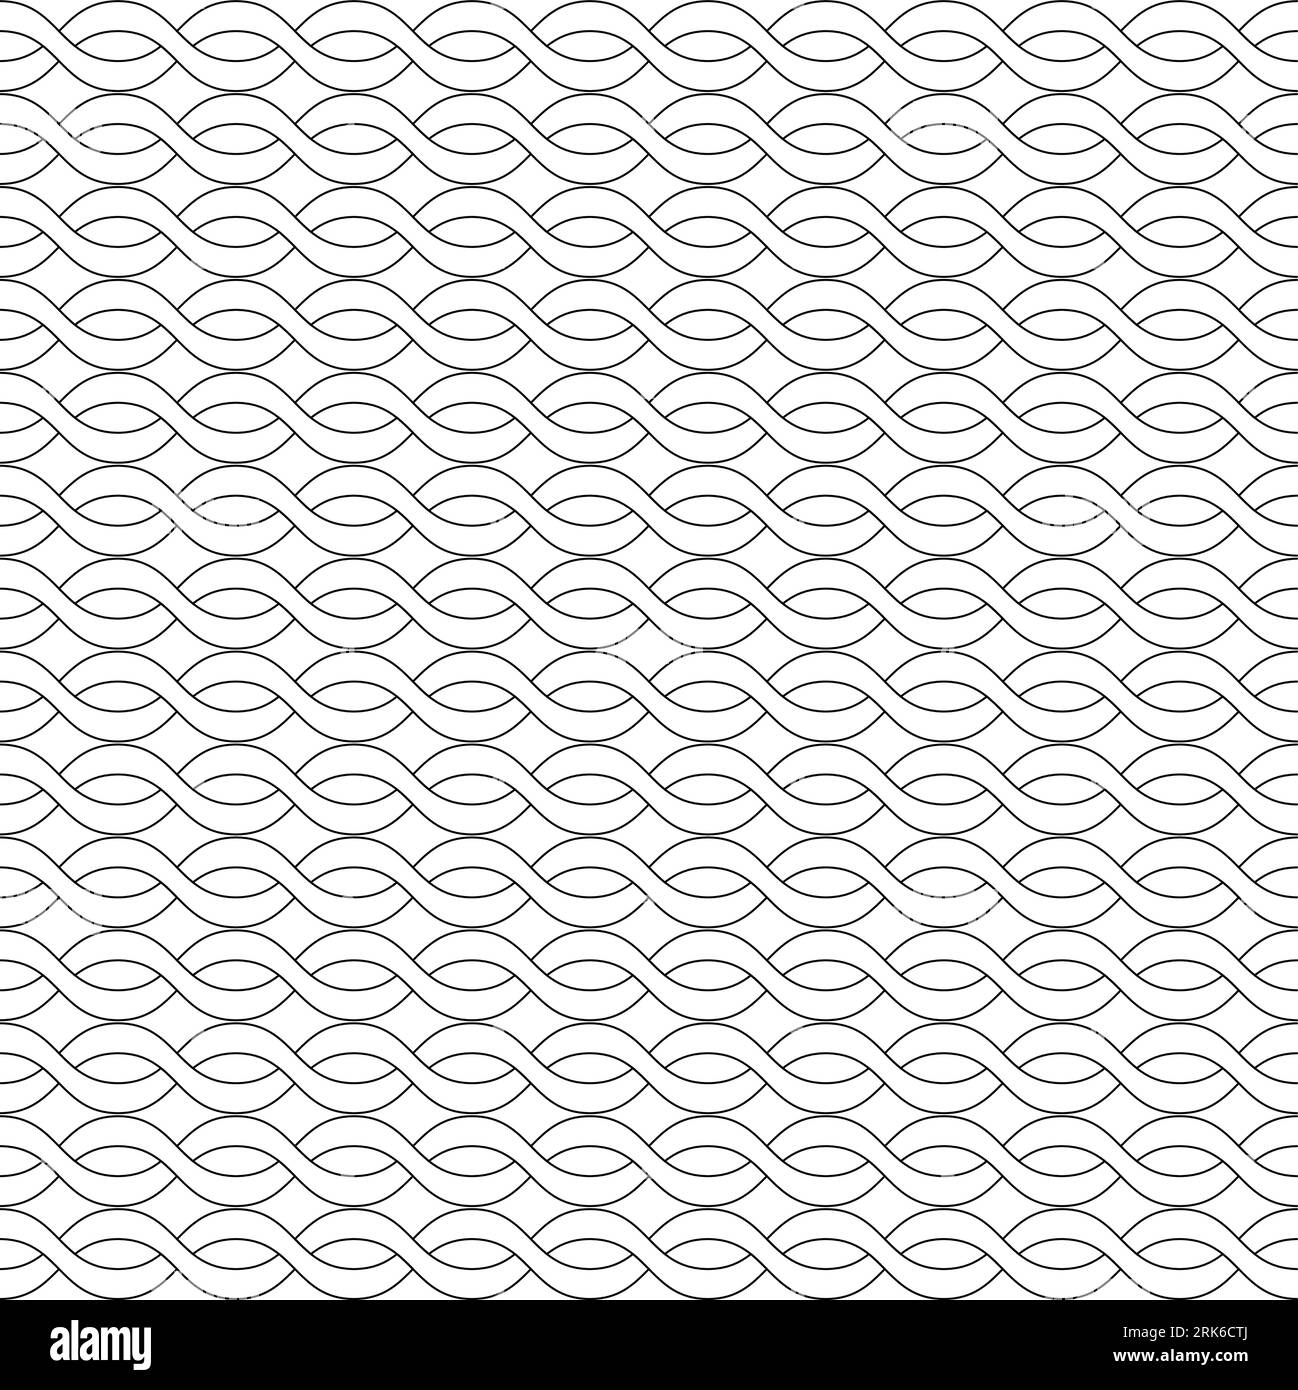 line pattern. Geometric simple black and white minimalistic pattern, diagonal thin lines. Can be used as wallpaper, background or texture. Collection Stock Vector